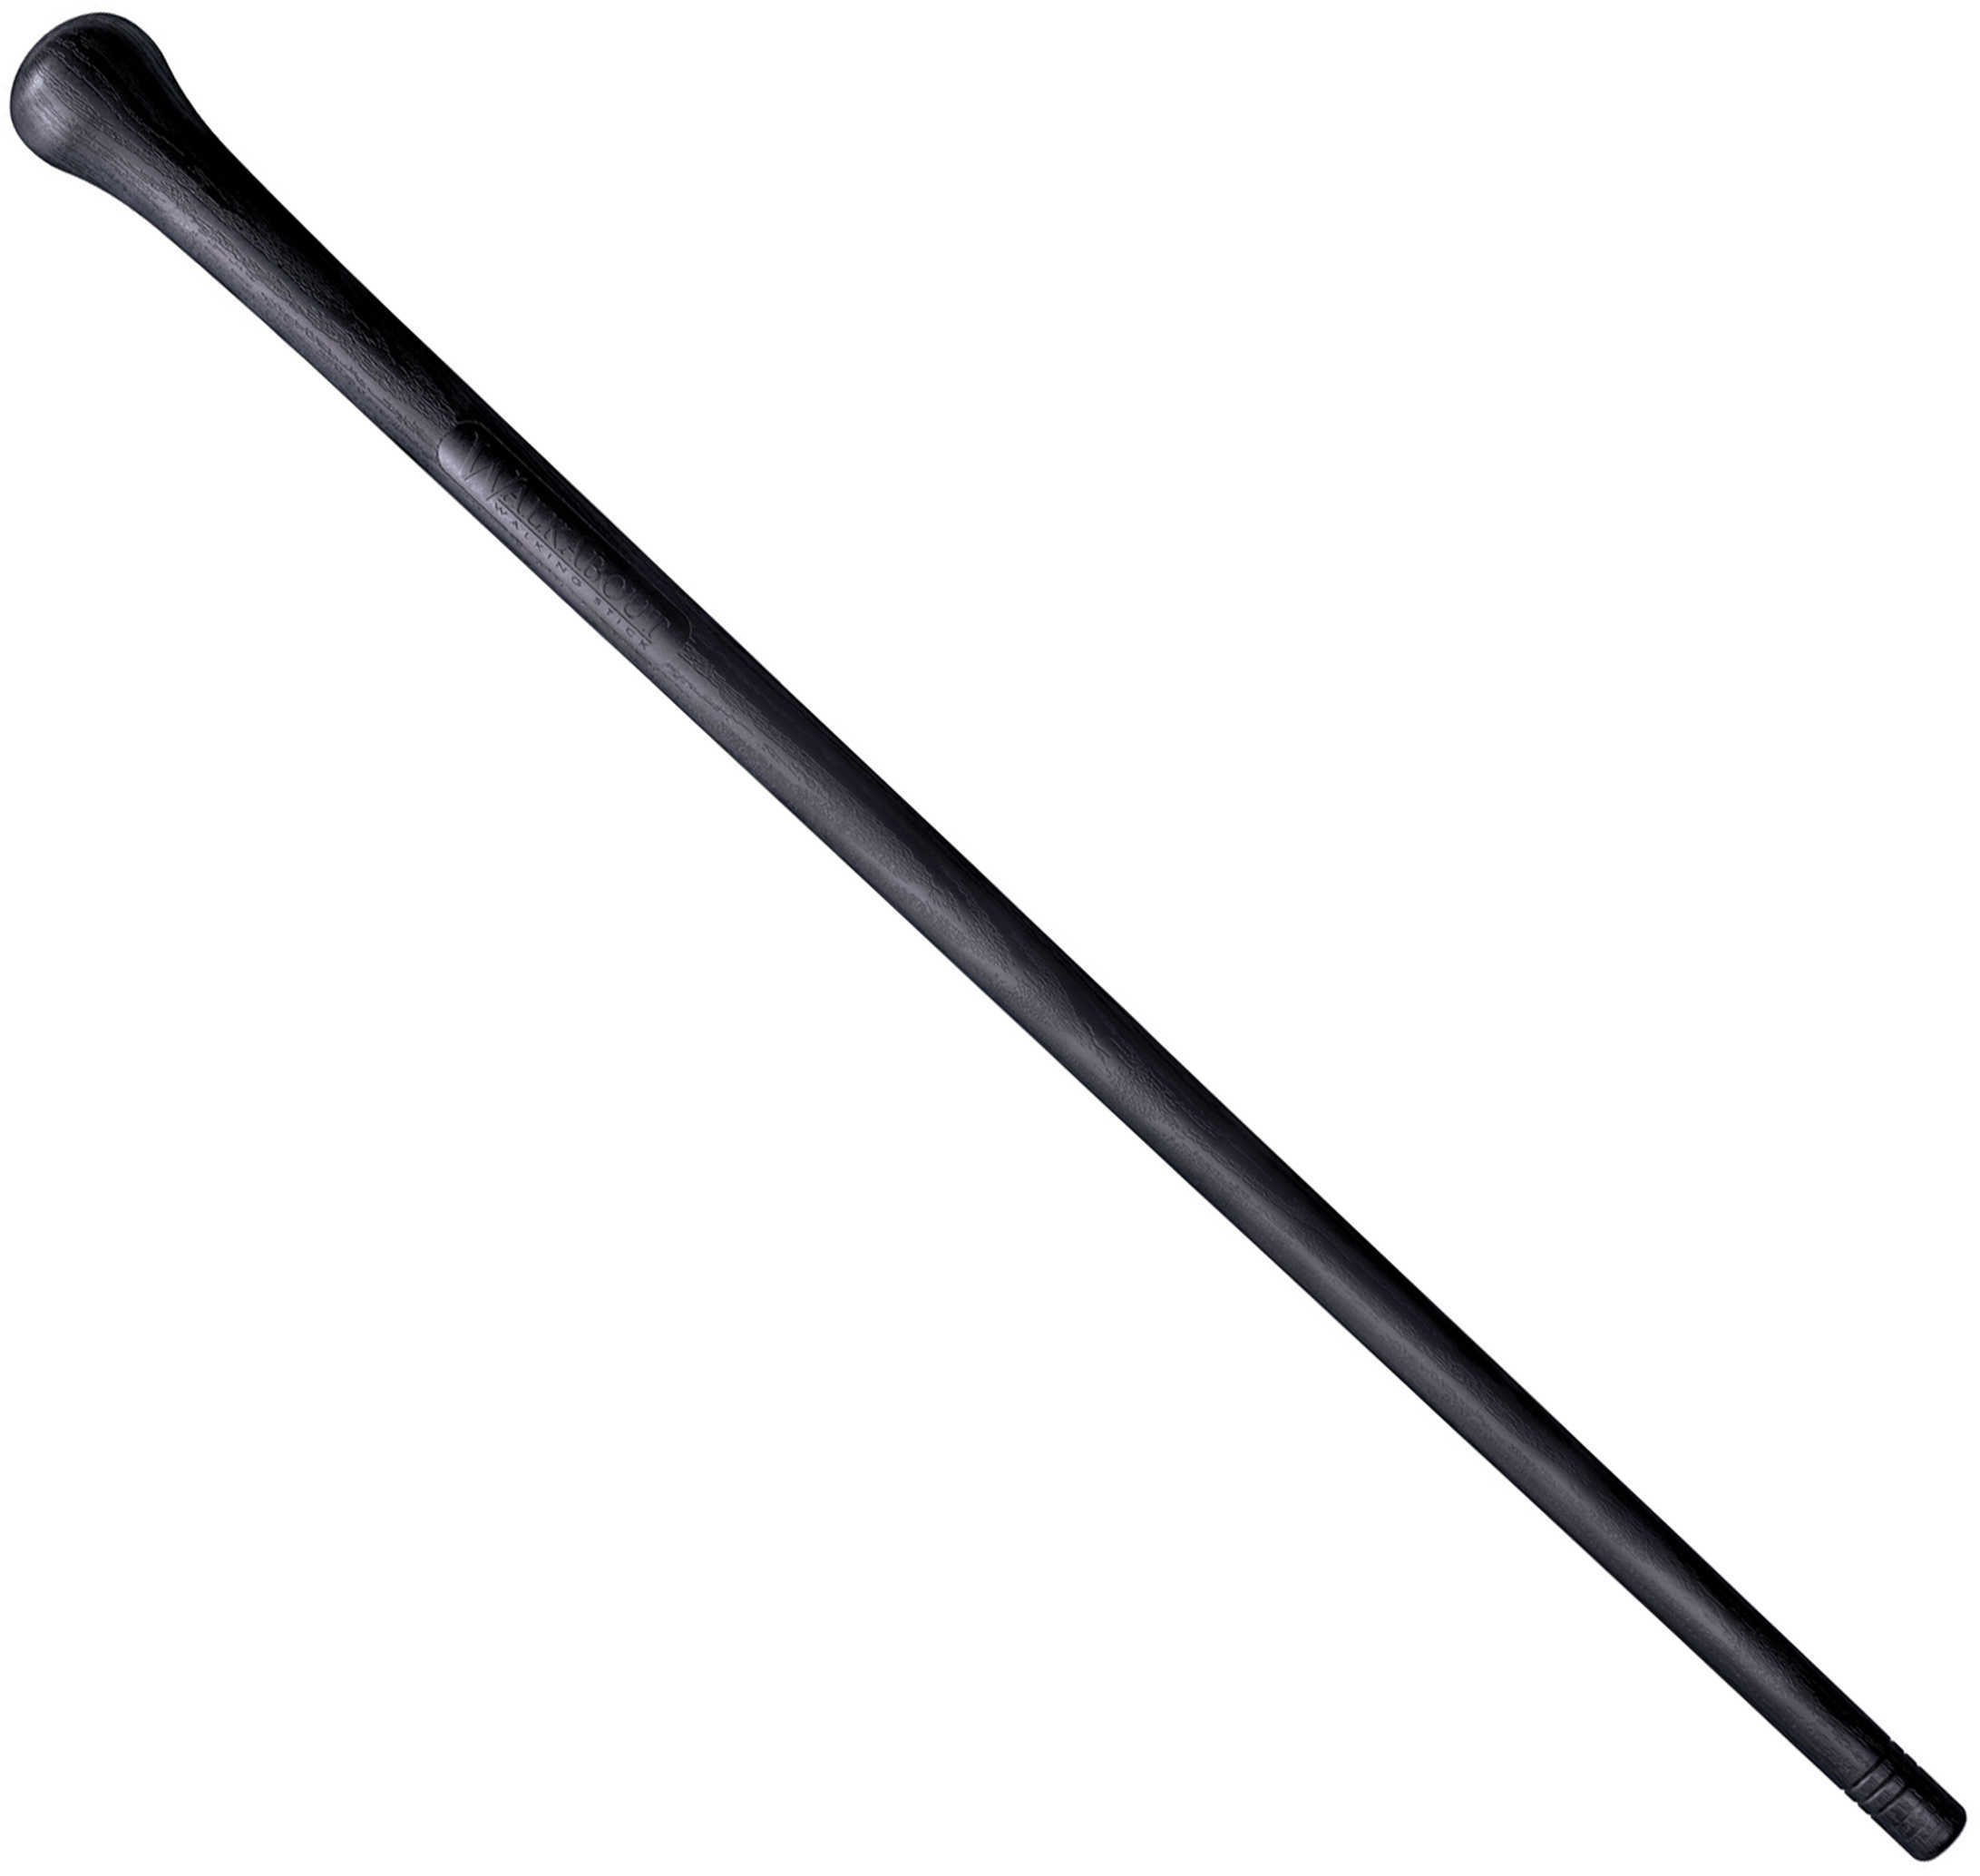 Cold Steel Walkabout Stick 38.50 in Overall Length